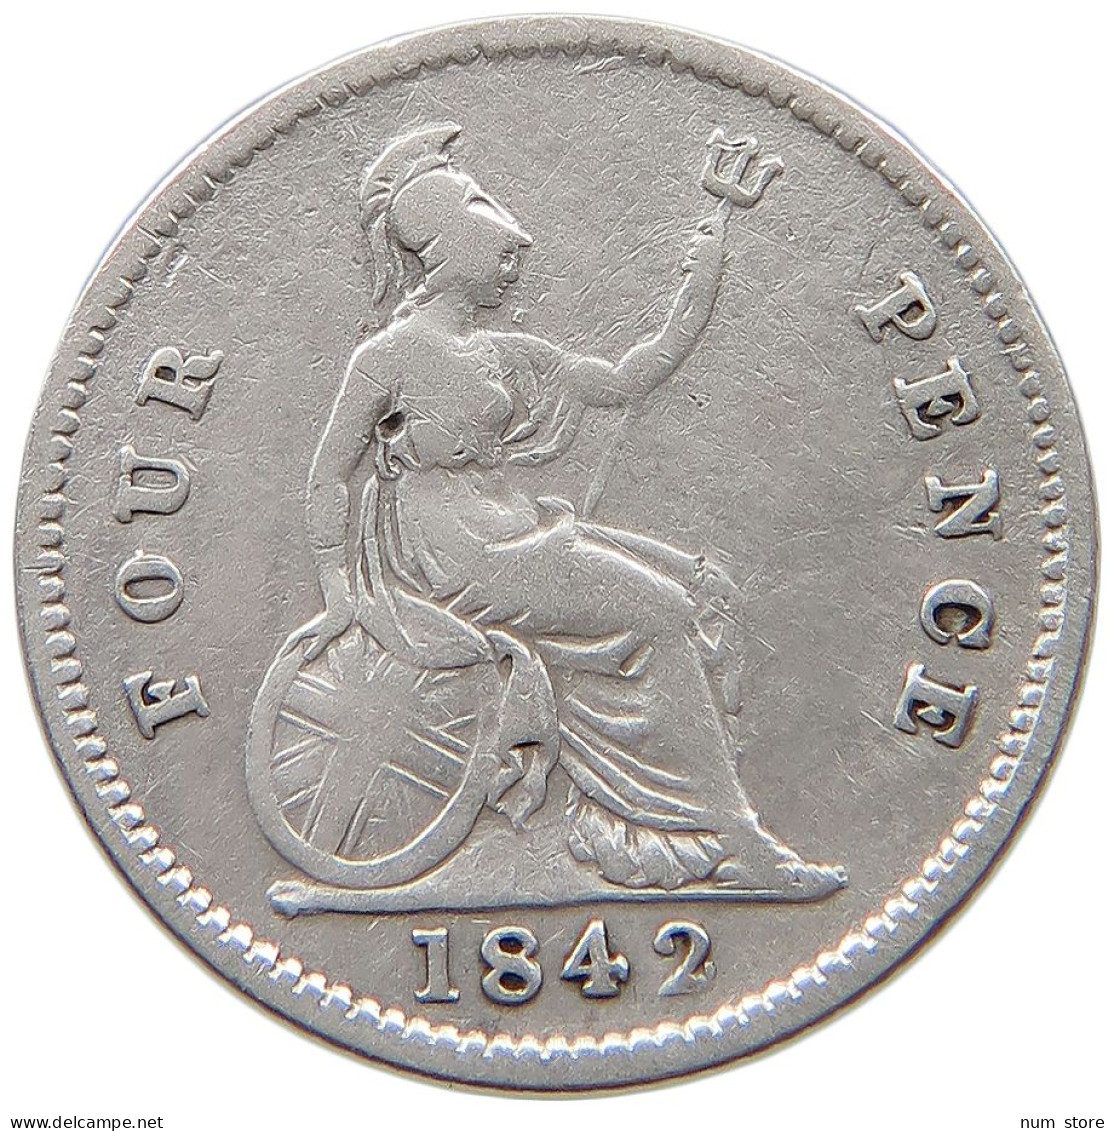 GREAT BRITAIN FOURPENCE 1842 Victoria 1837-1901 #t095 0643 - G. 4 Pence/ Groat